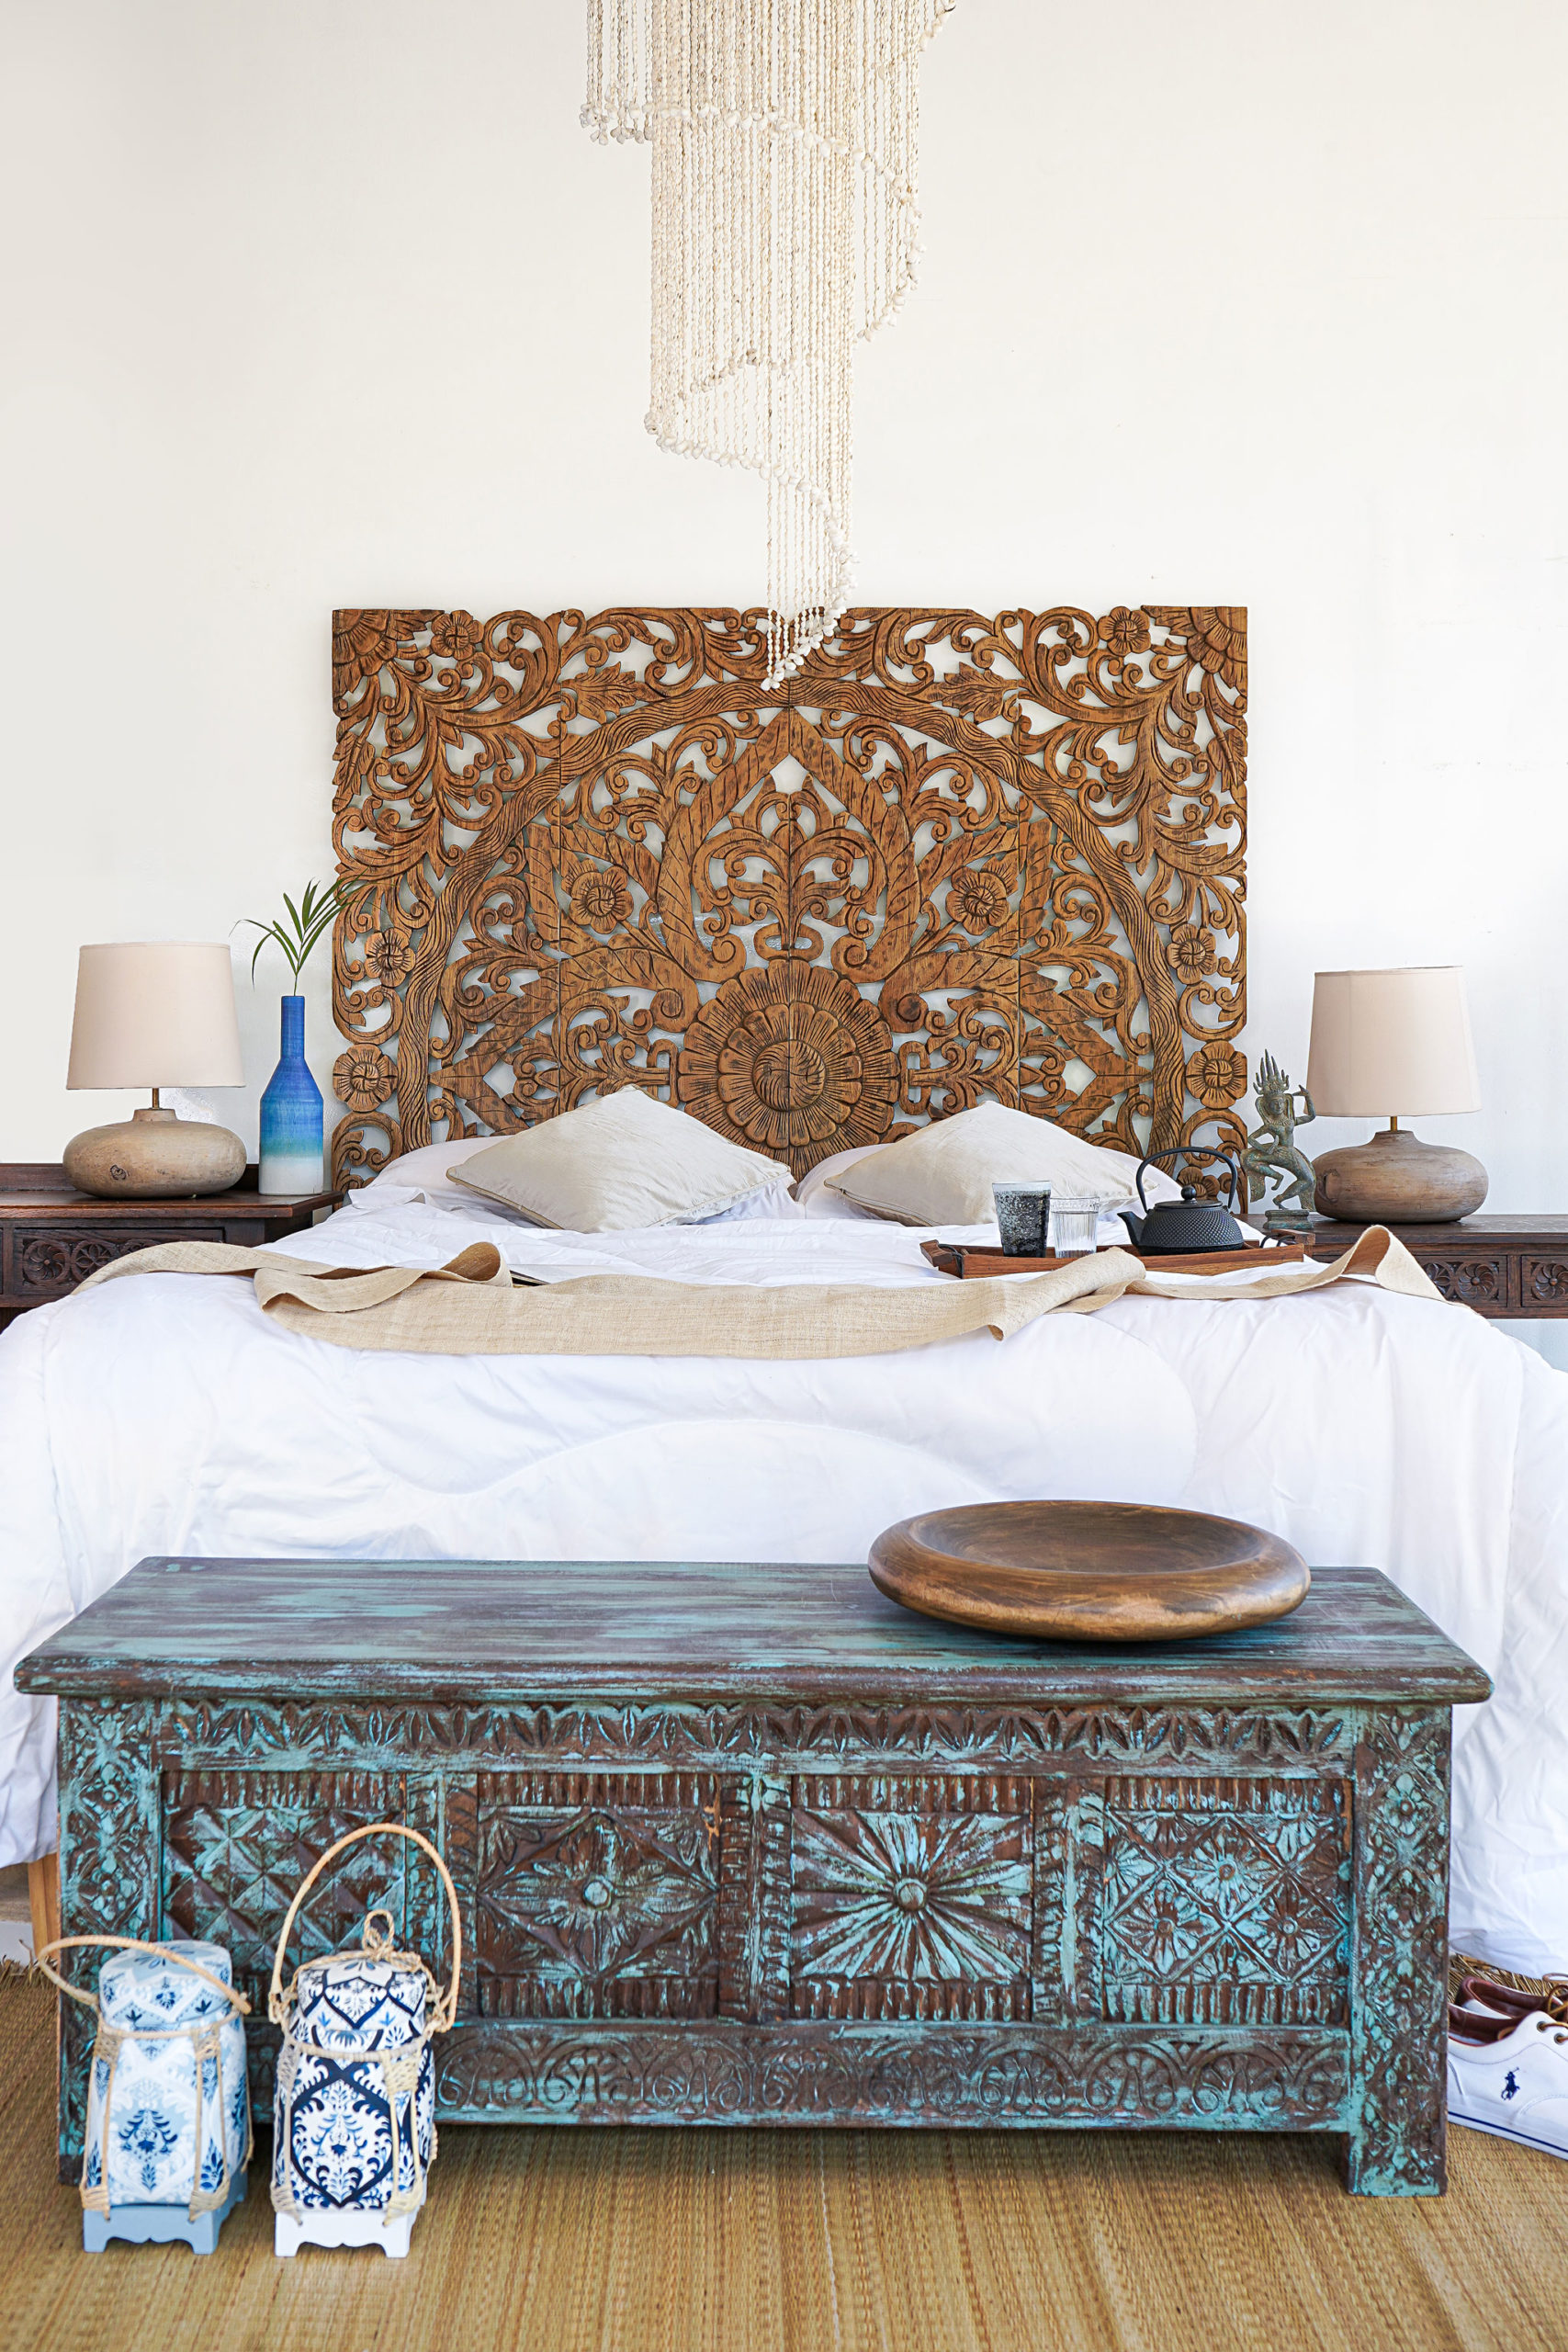 Kingsize Headboard Balinese Wooden, Hand Carved King Size Bed Frame